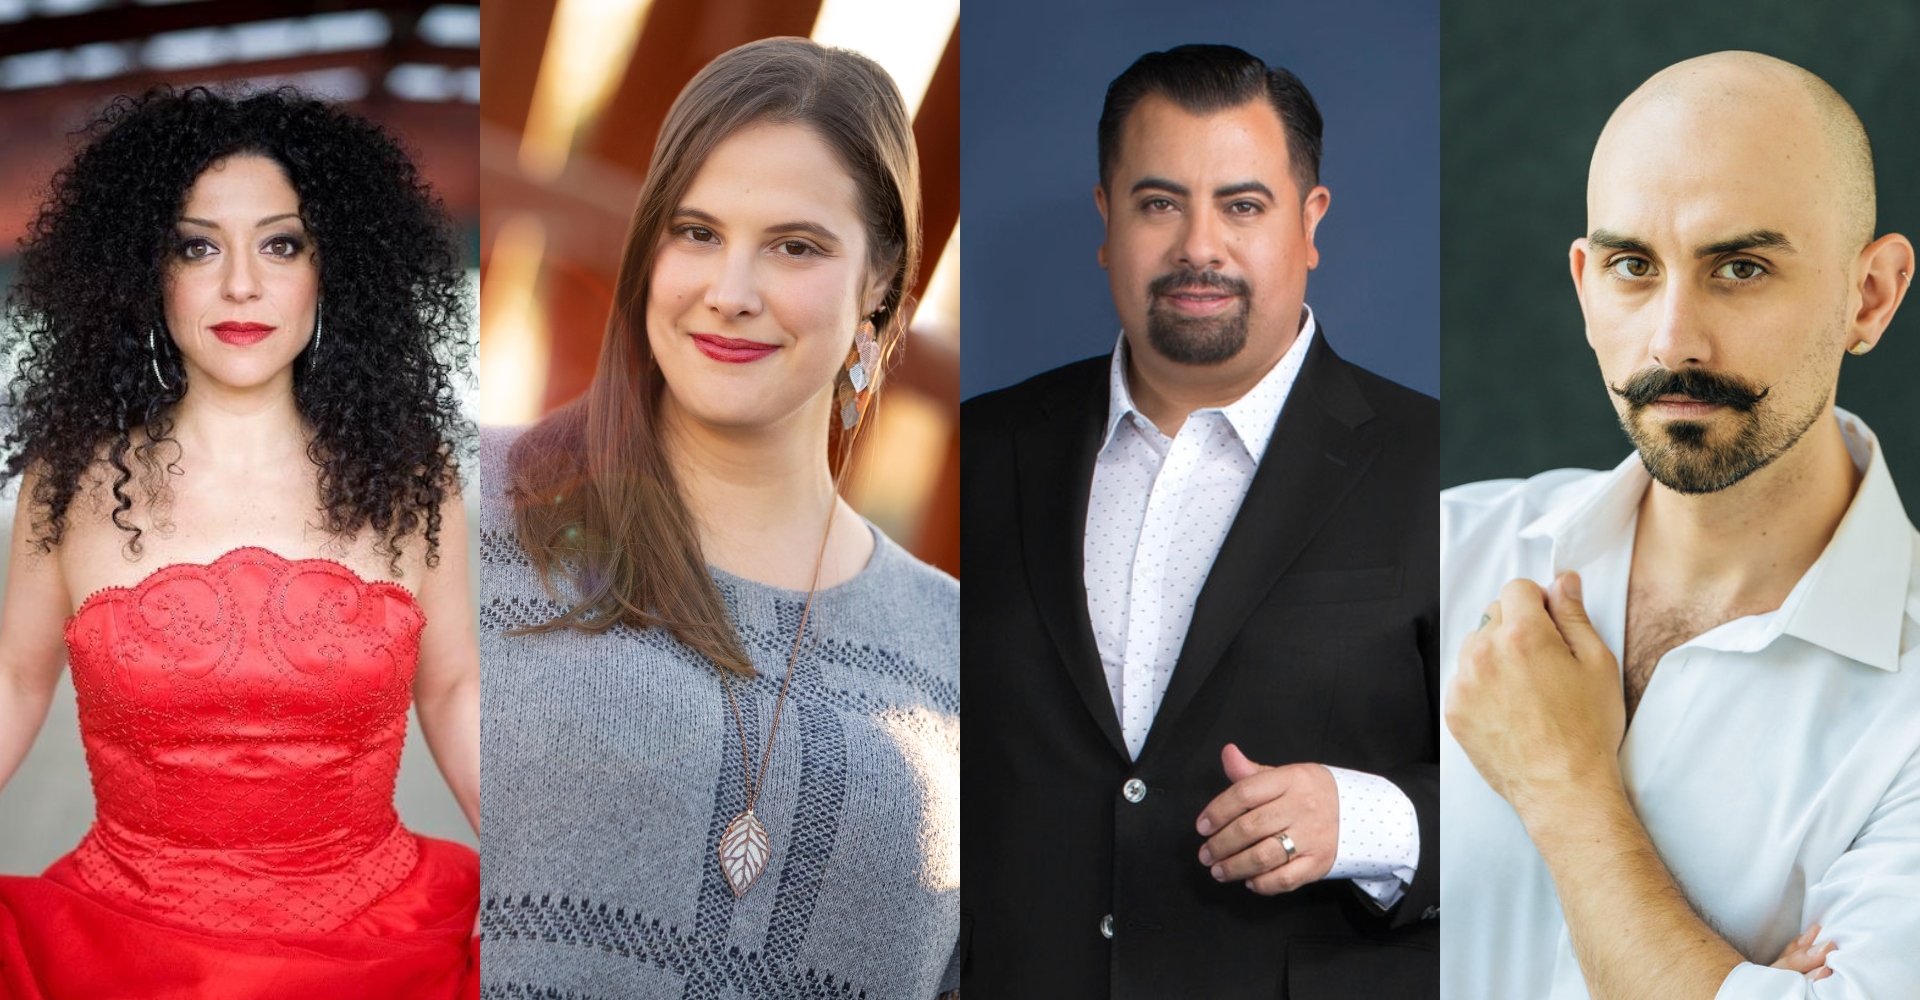 The Best of MSO Opera – Meet the Cast